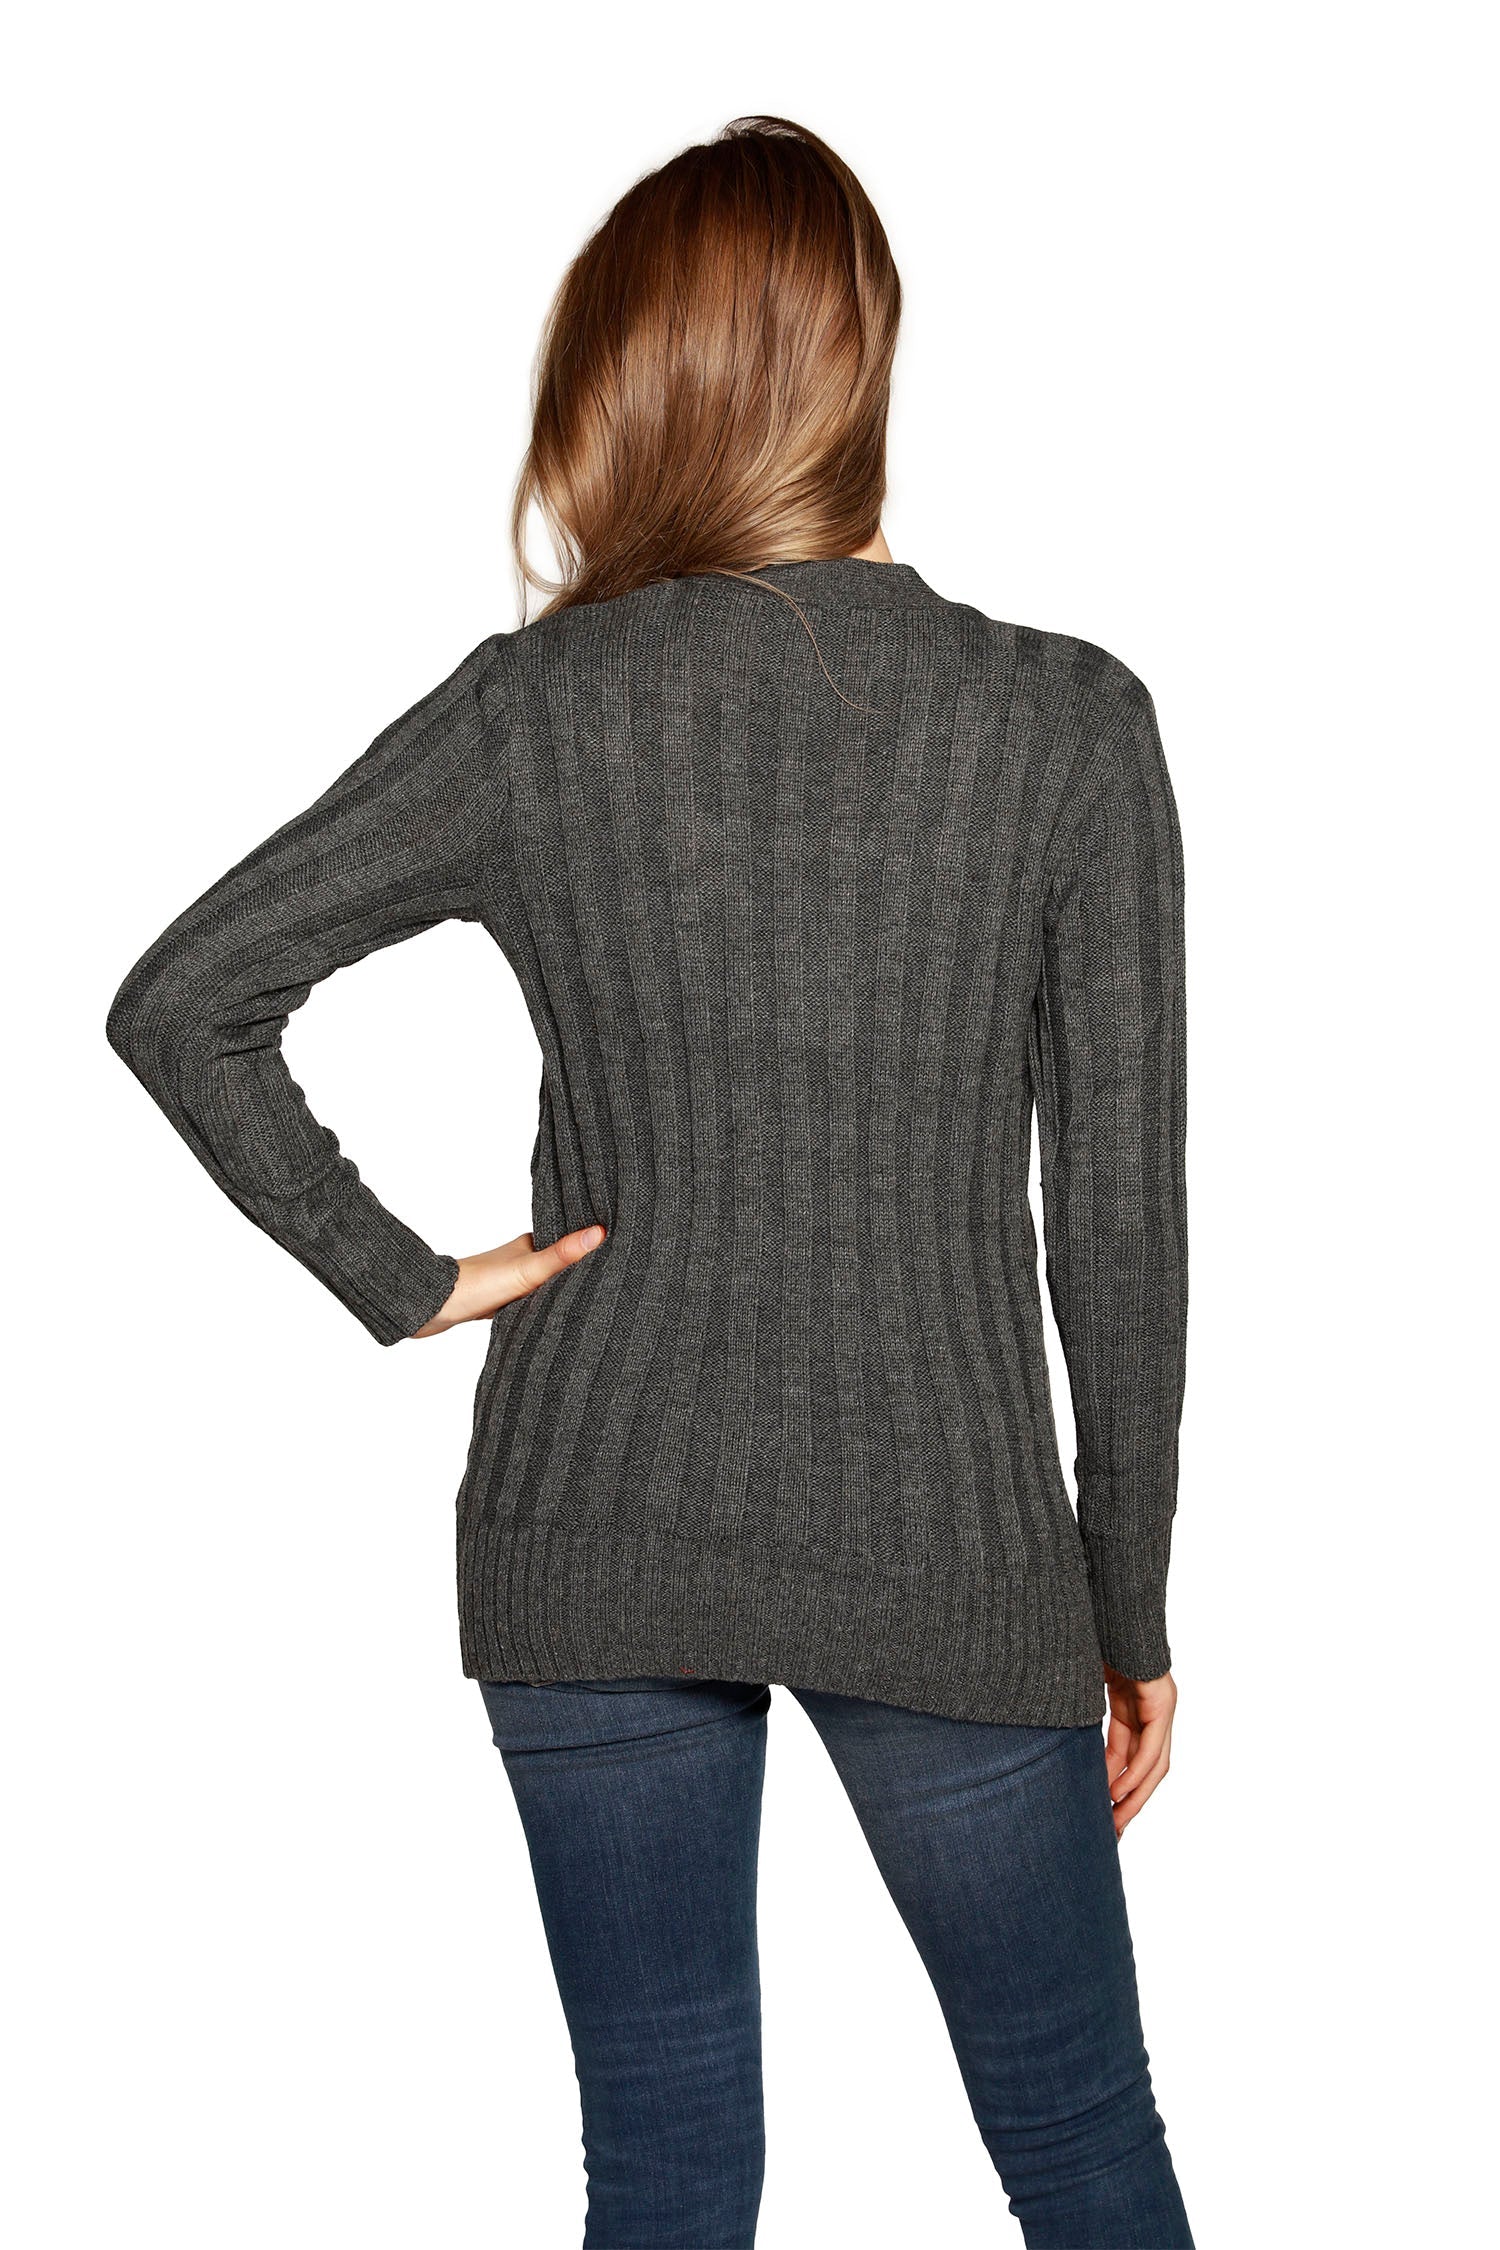 Women's Boyfriend Cardigan Button Front Cable Knit Sweater with Pockets